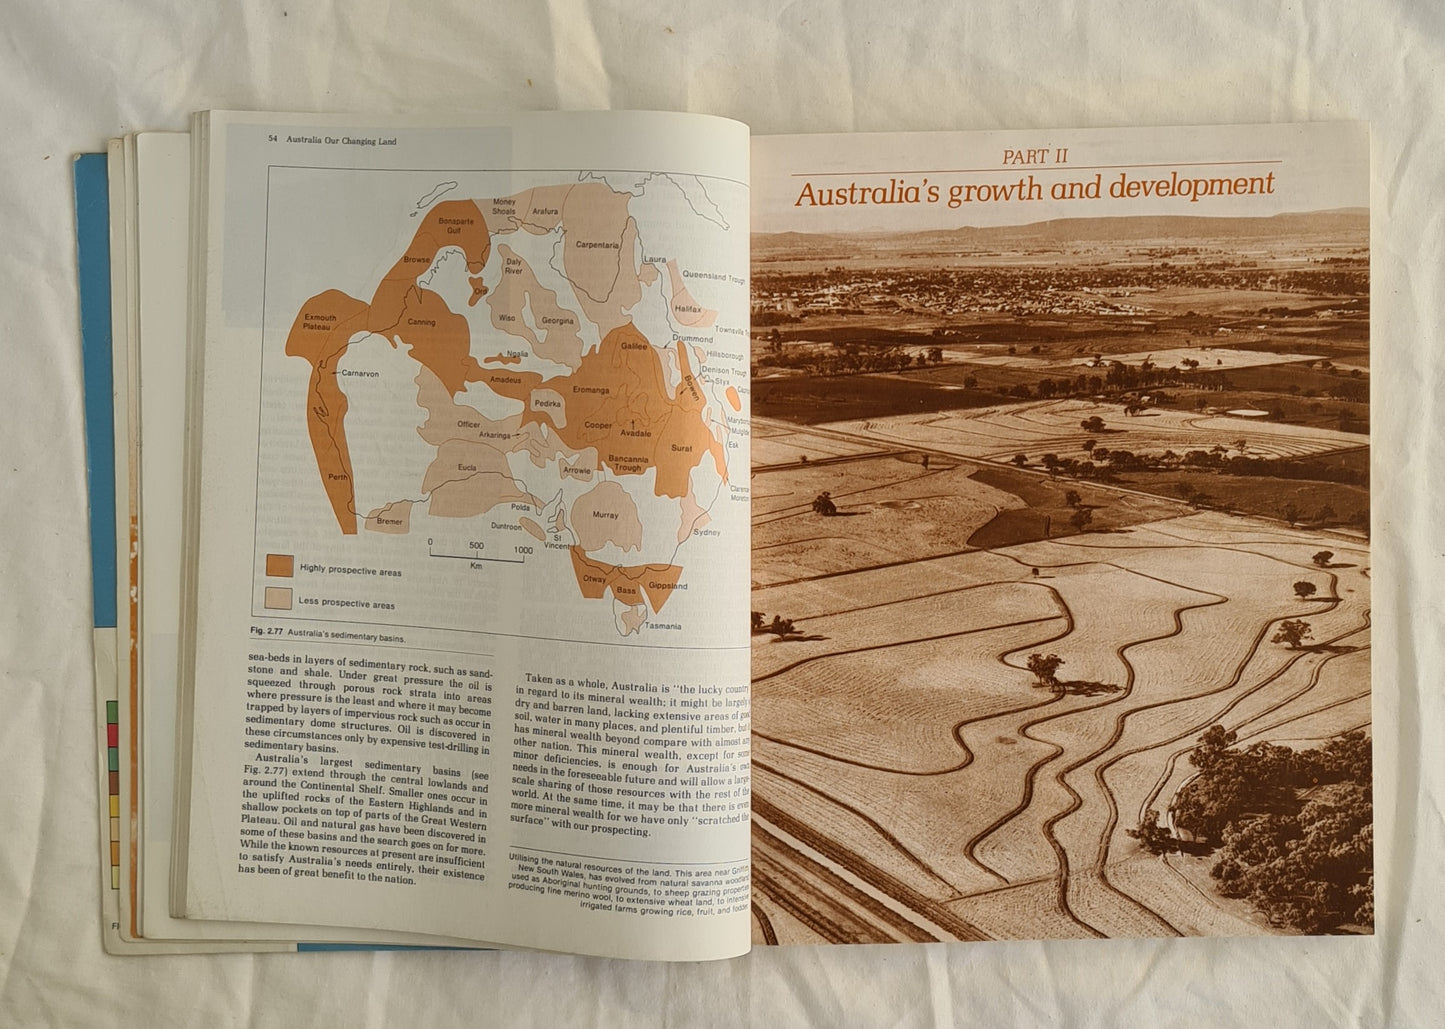 Australia Our Changing Land by Colin Sale and Graeme Wilson